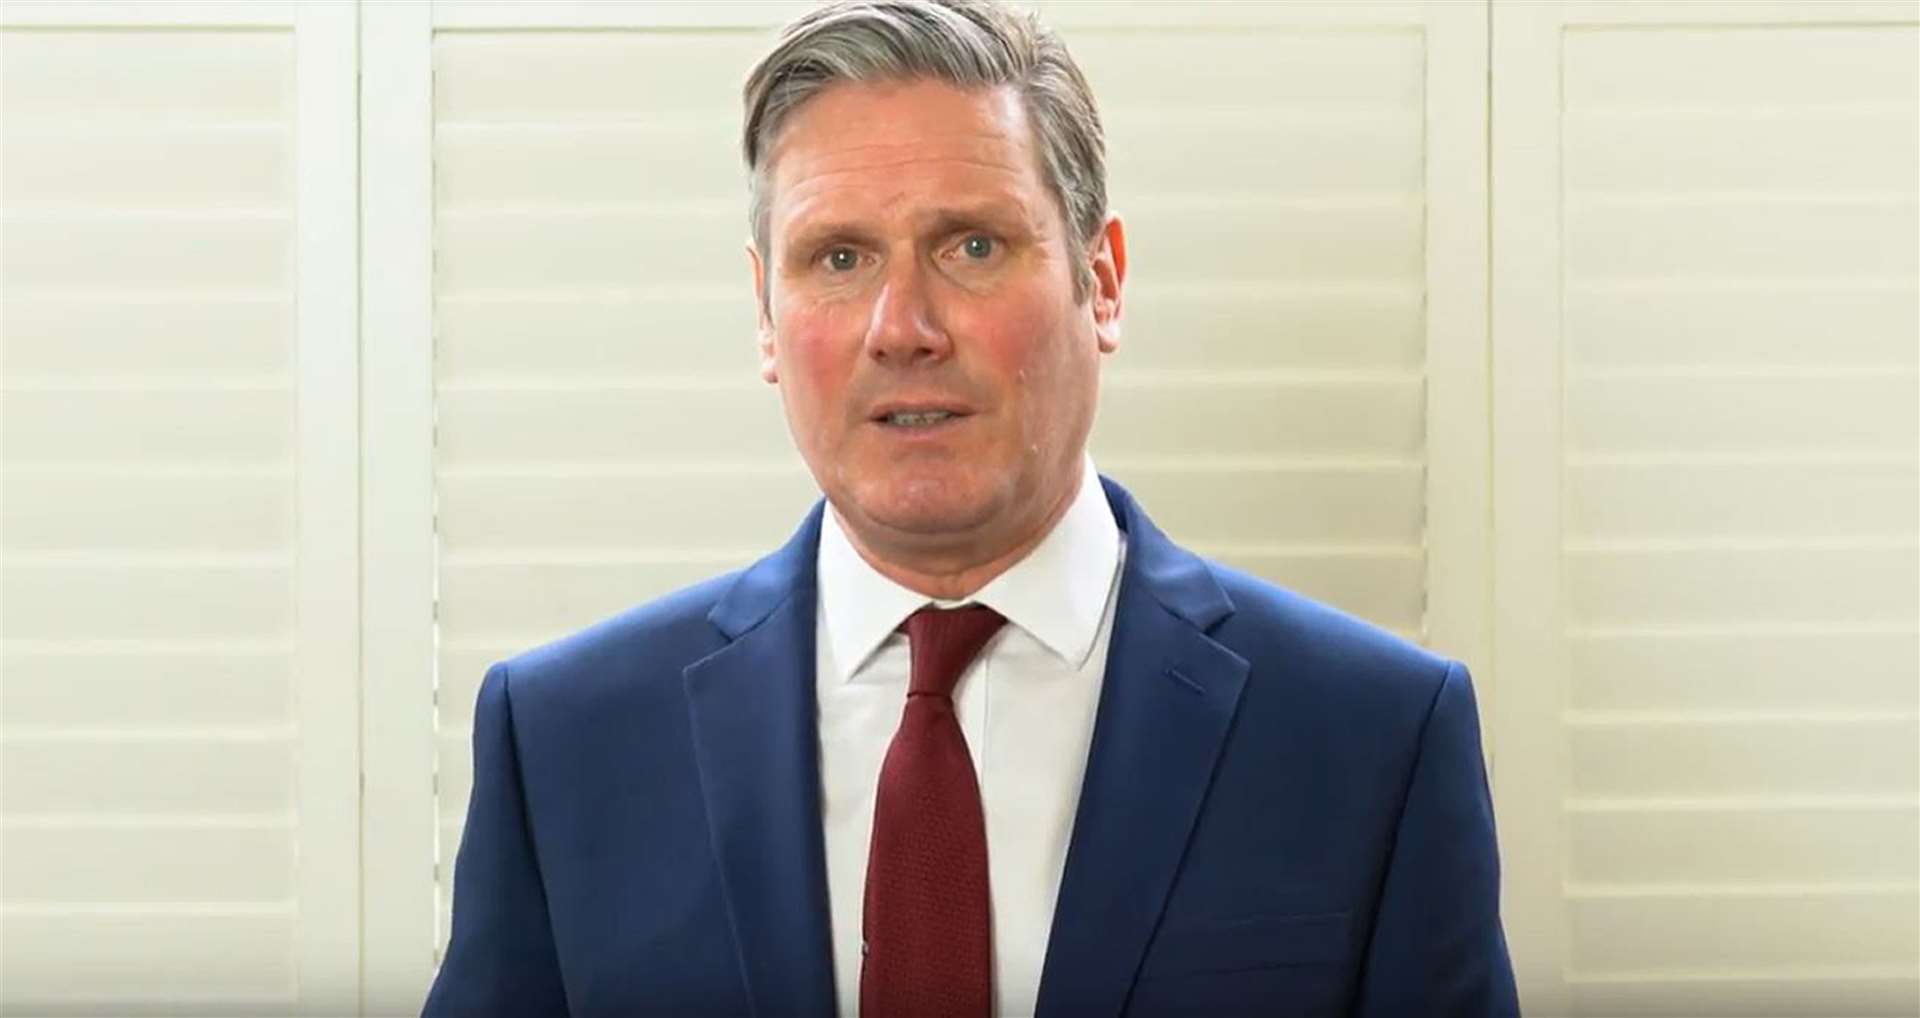 Sir Keir Starmer’s acceptance speech was not how anyone could have imagined it when the Labour leadership contest first began (Labour Party)